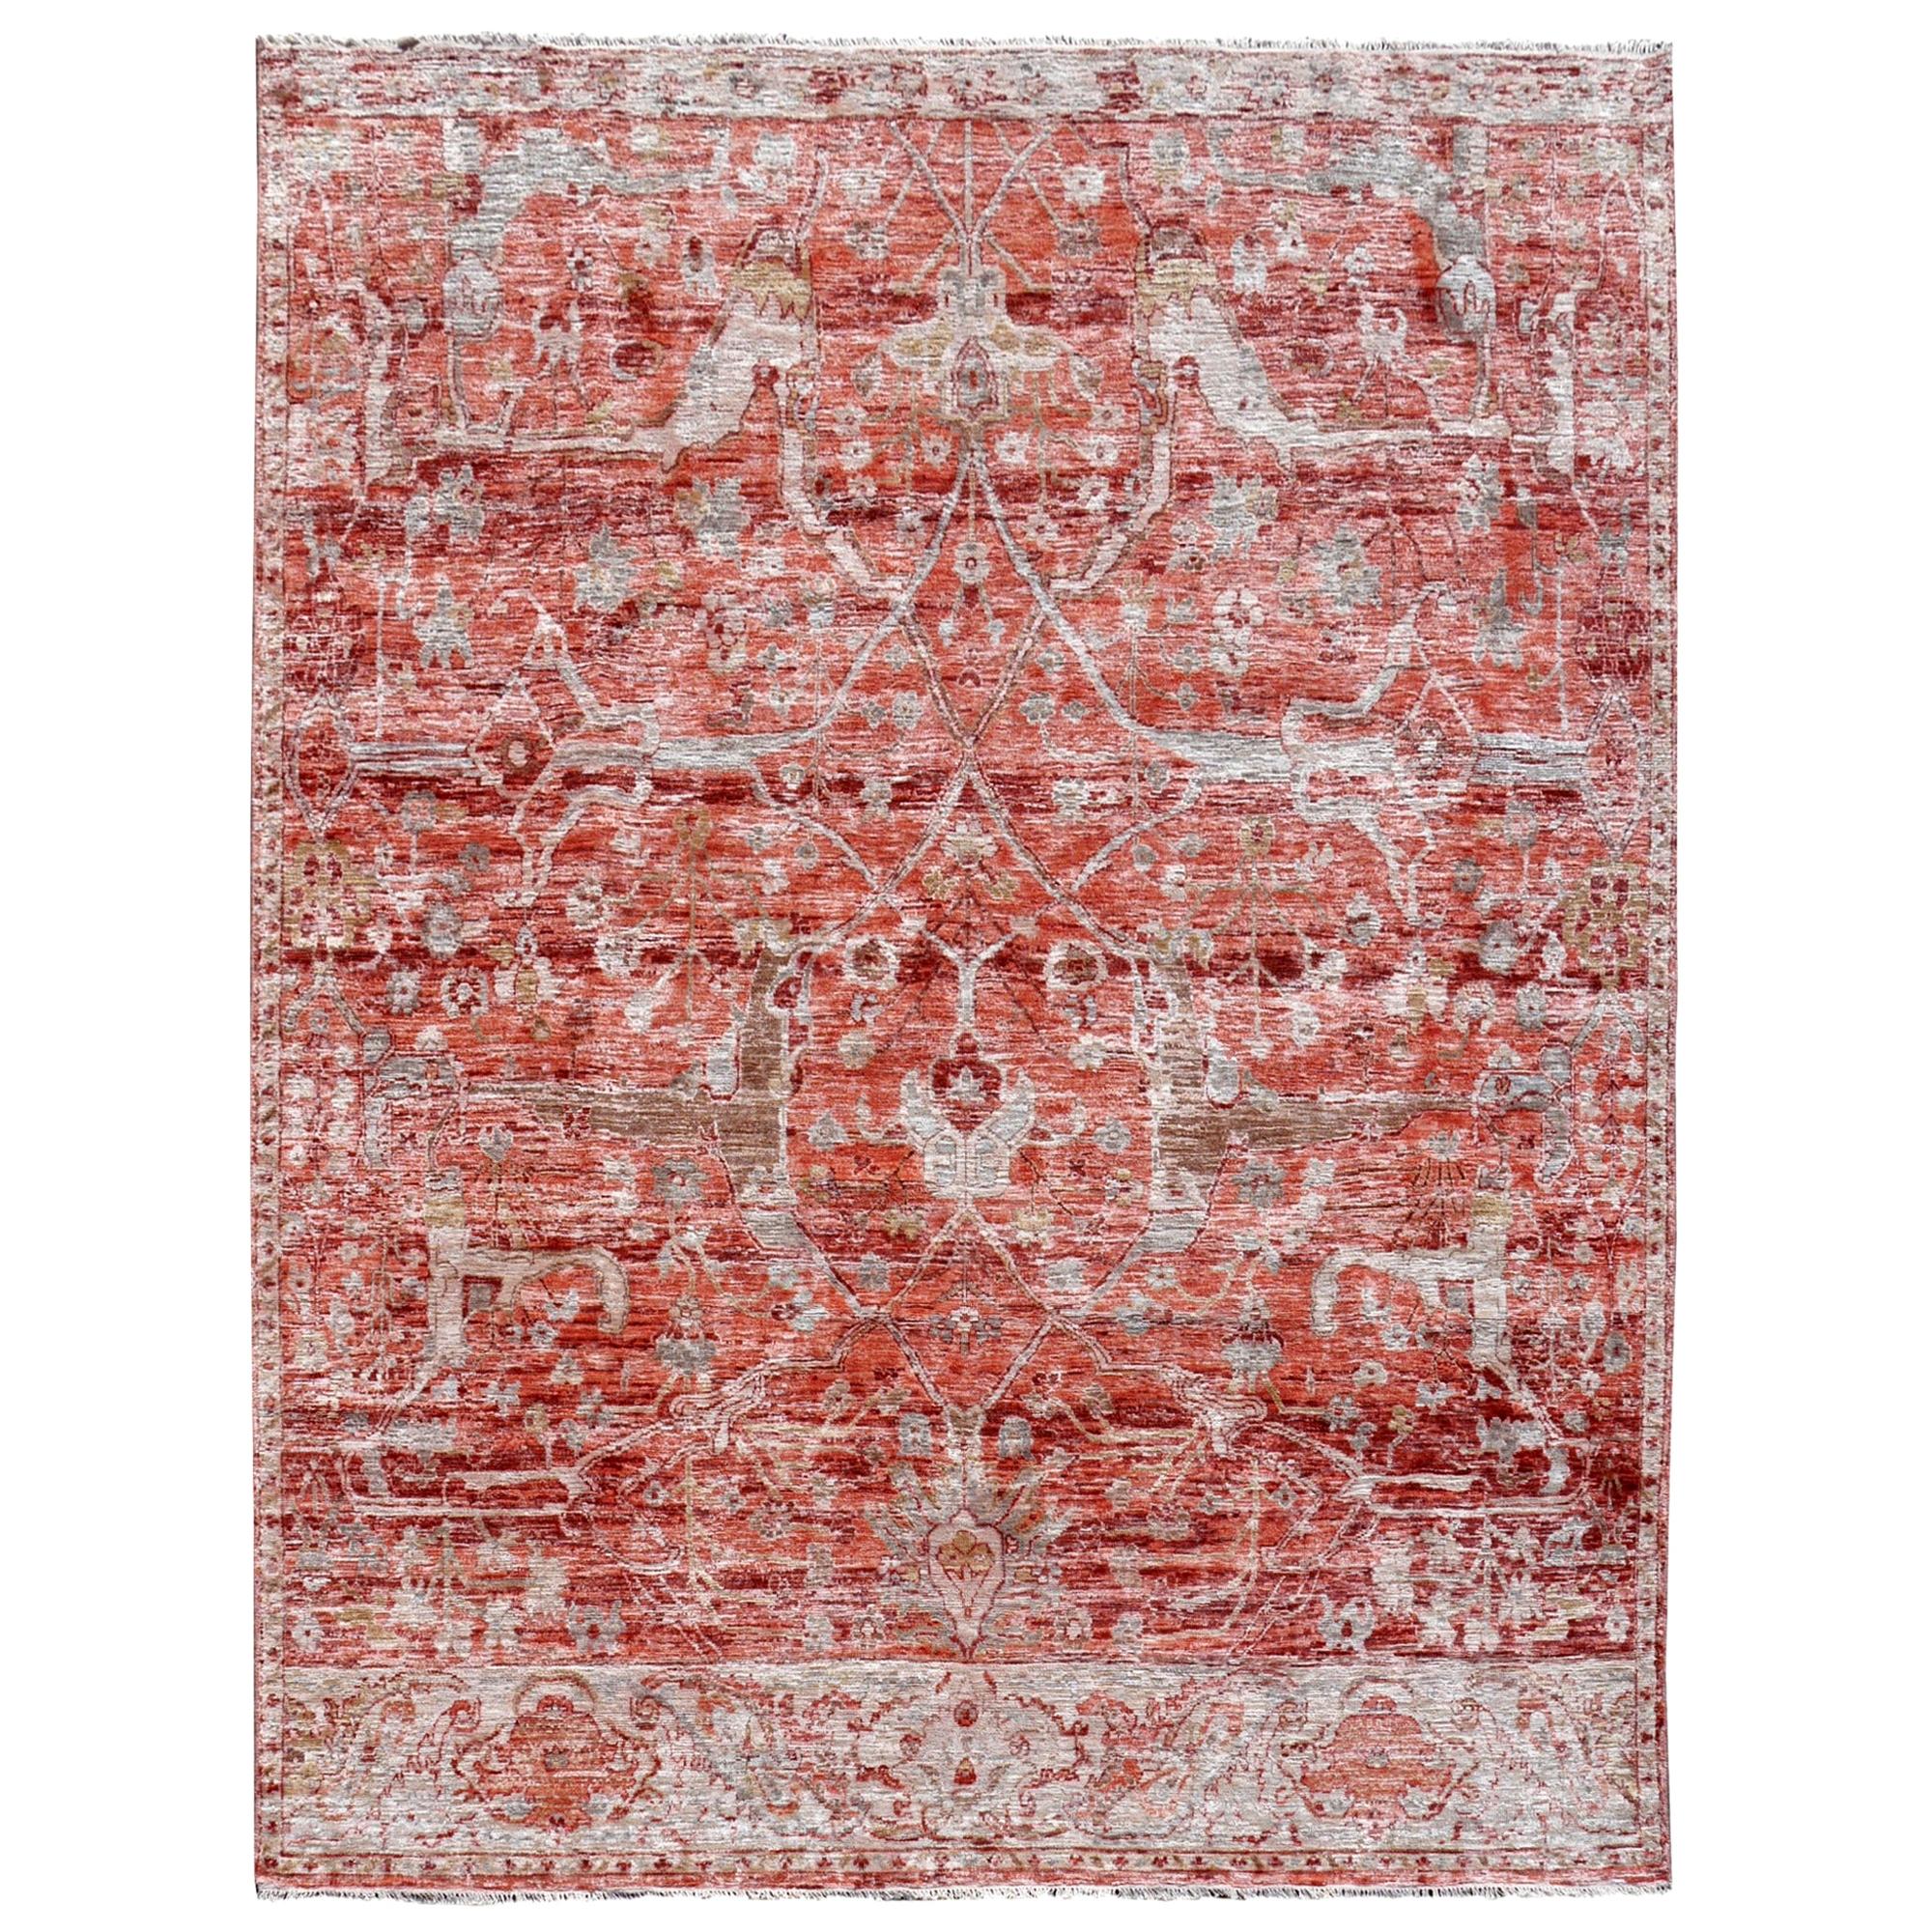 Modern Rug Hand Knotted in Style of Heriz Serapi or Antique Sultanabad